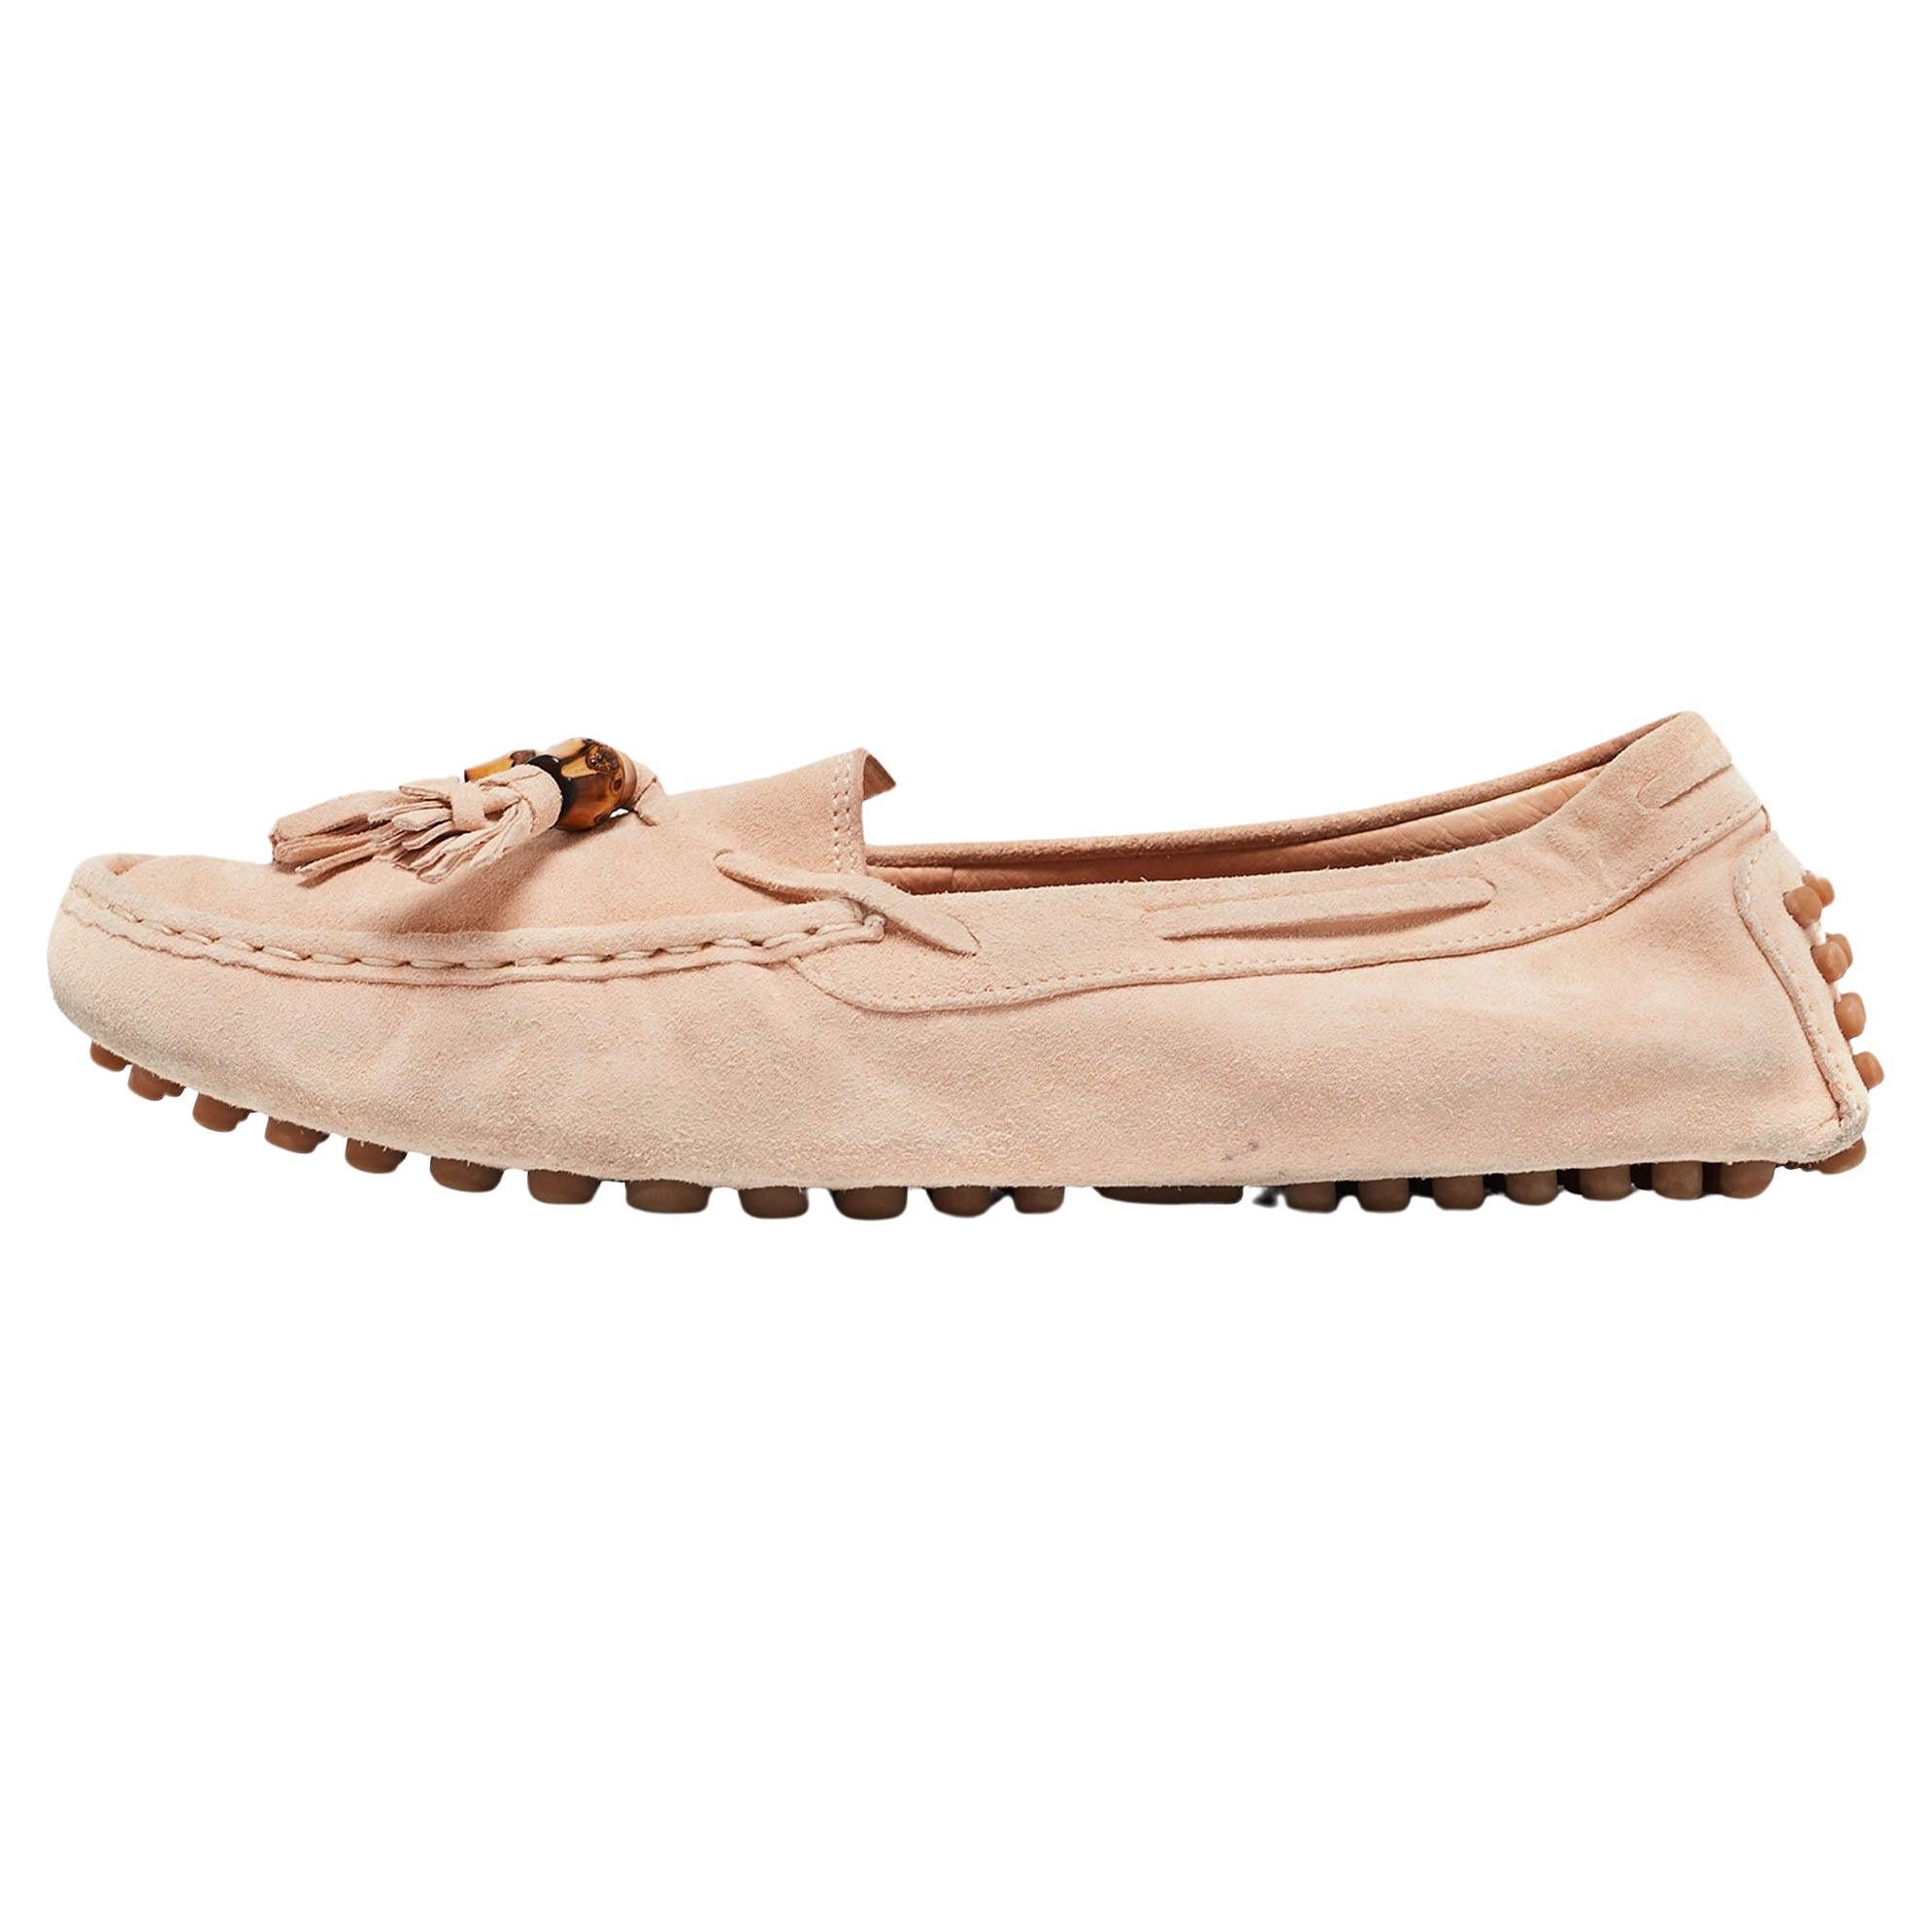 Gucci Light Pink Suede Bamboo Tassel Slip On Loafers Size 37.5 For Sale